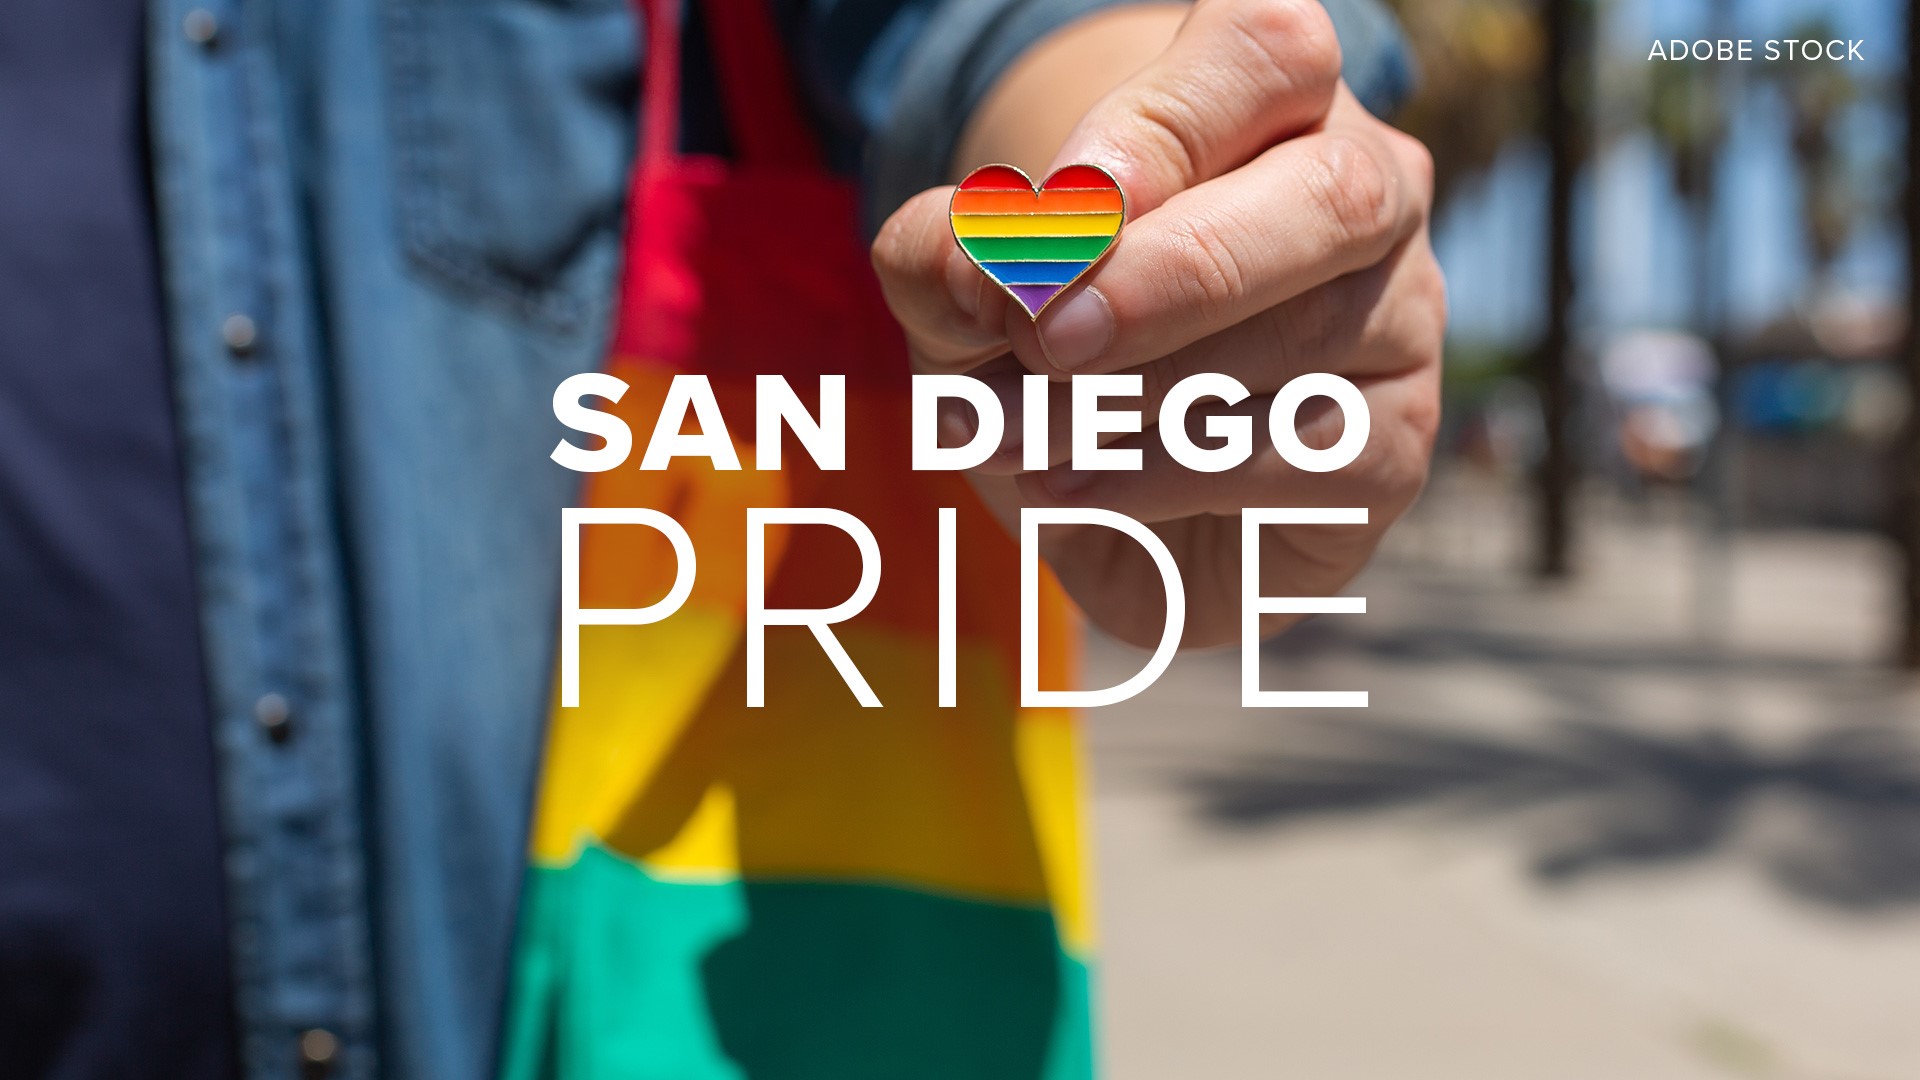 Back in 1990, San Diego LGBT Pride made the executive decision to move Pride to July, due to "June Gloom" raining on all the Pride Month festivities.